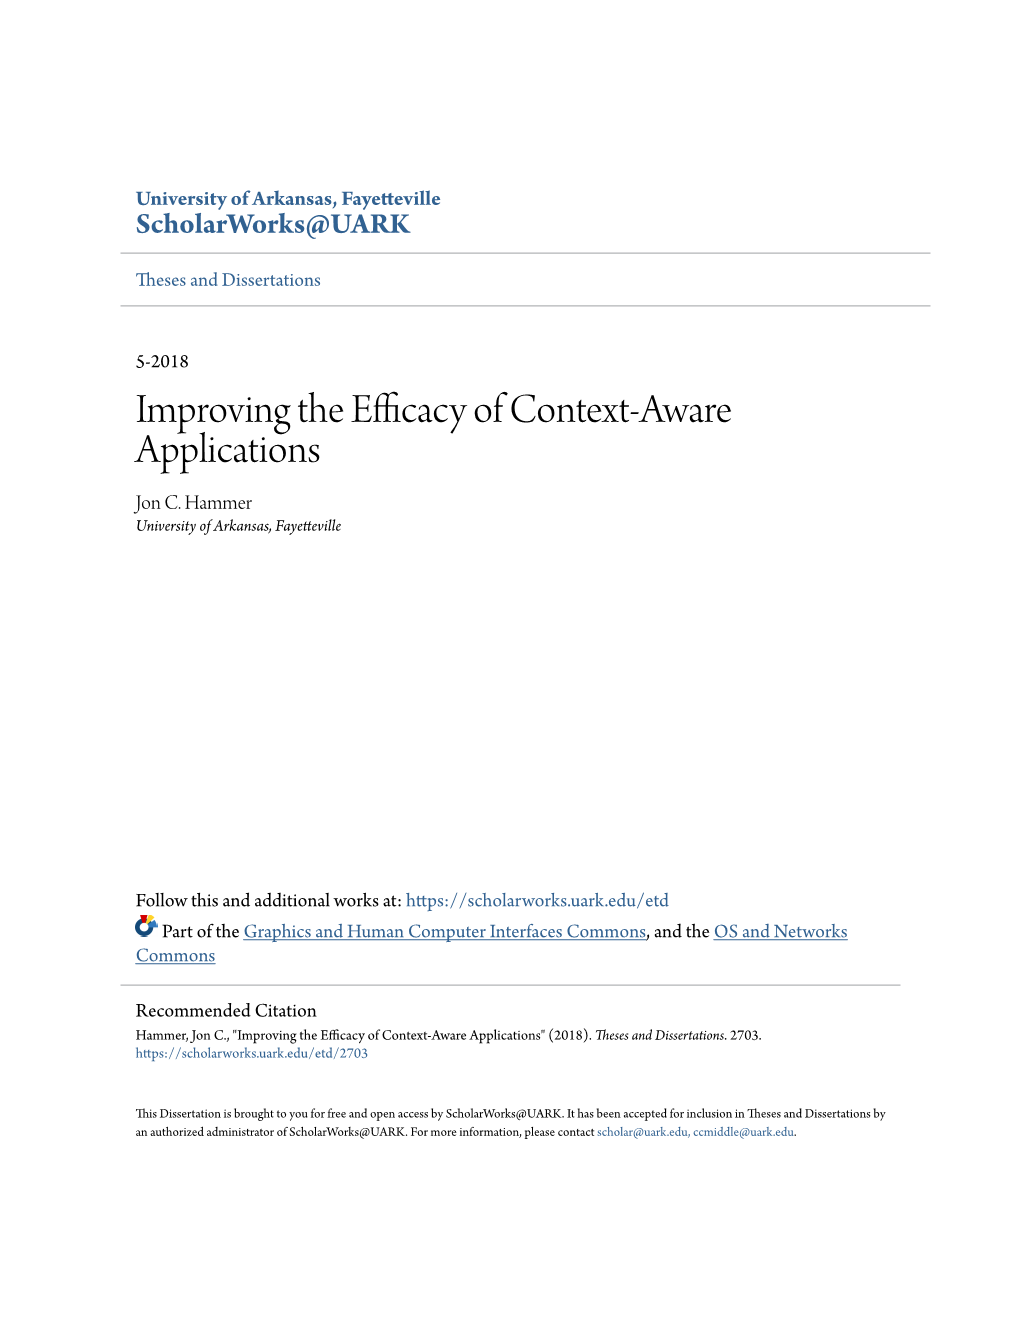 Improving the Efficacy of Context-Aware Applications Jon C